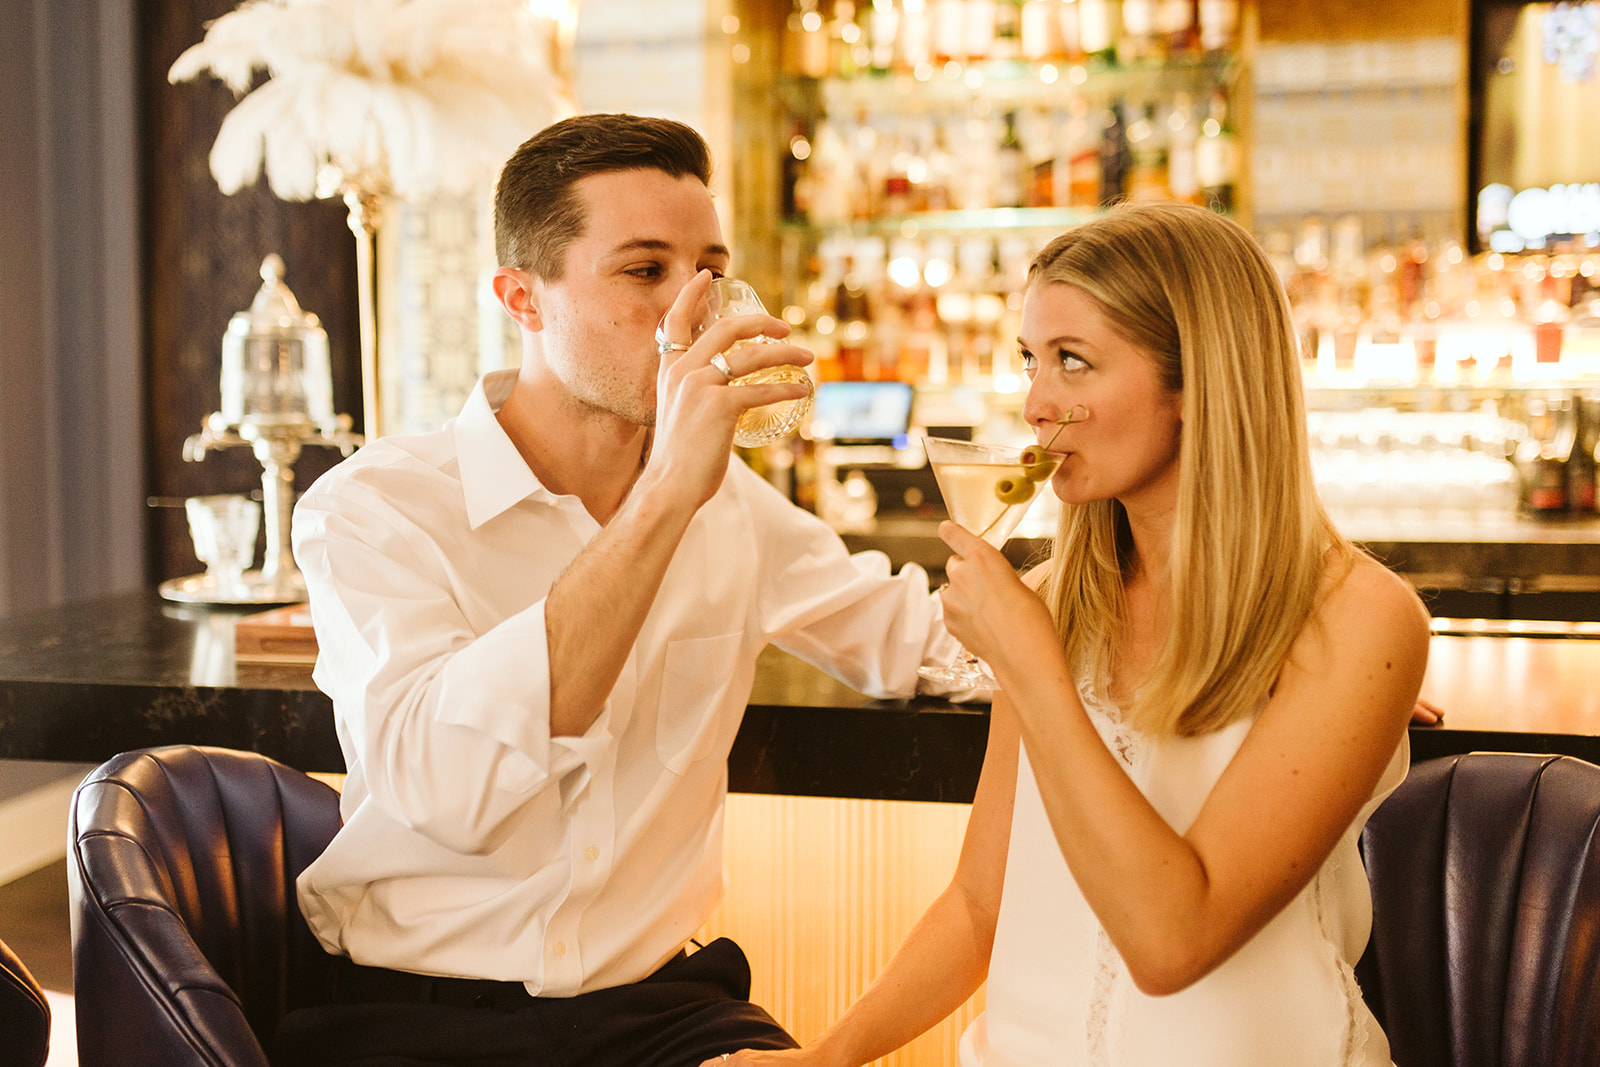 A bride and groom share drinks at The Read House bar.